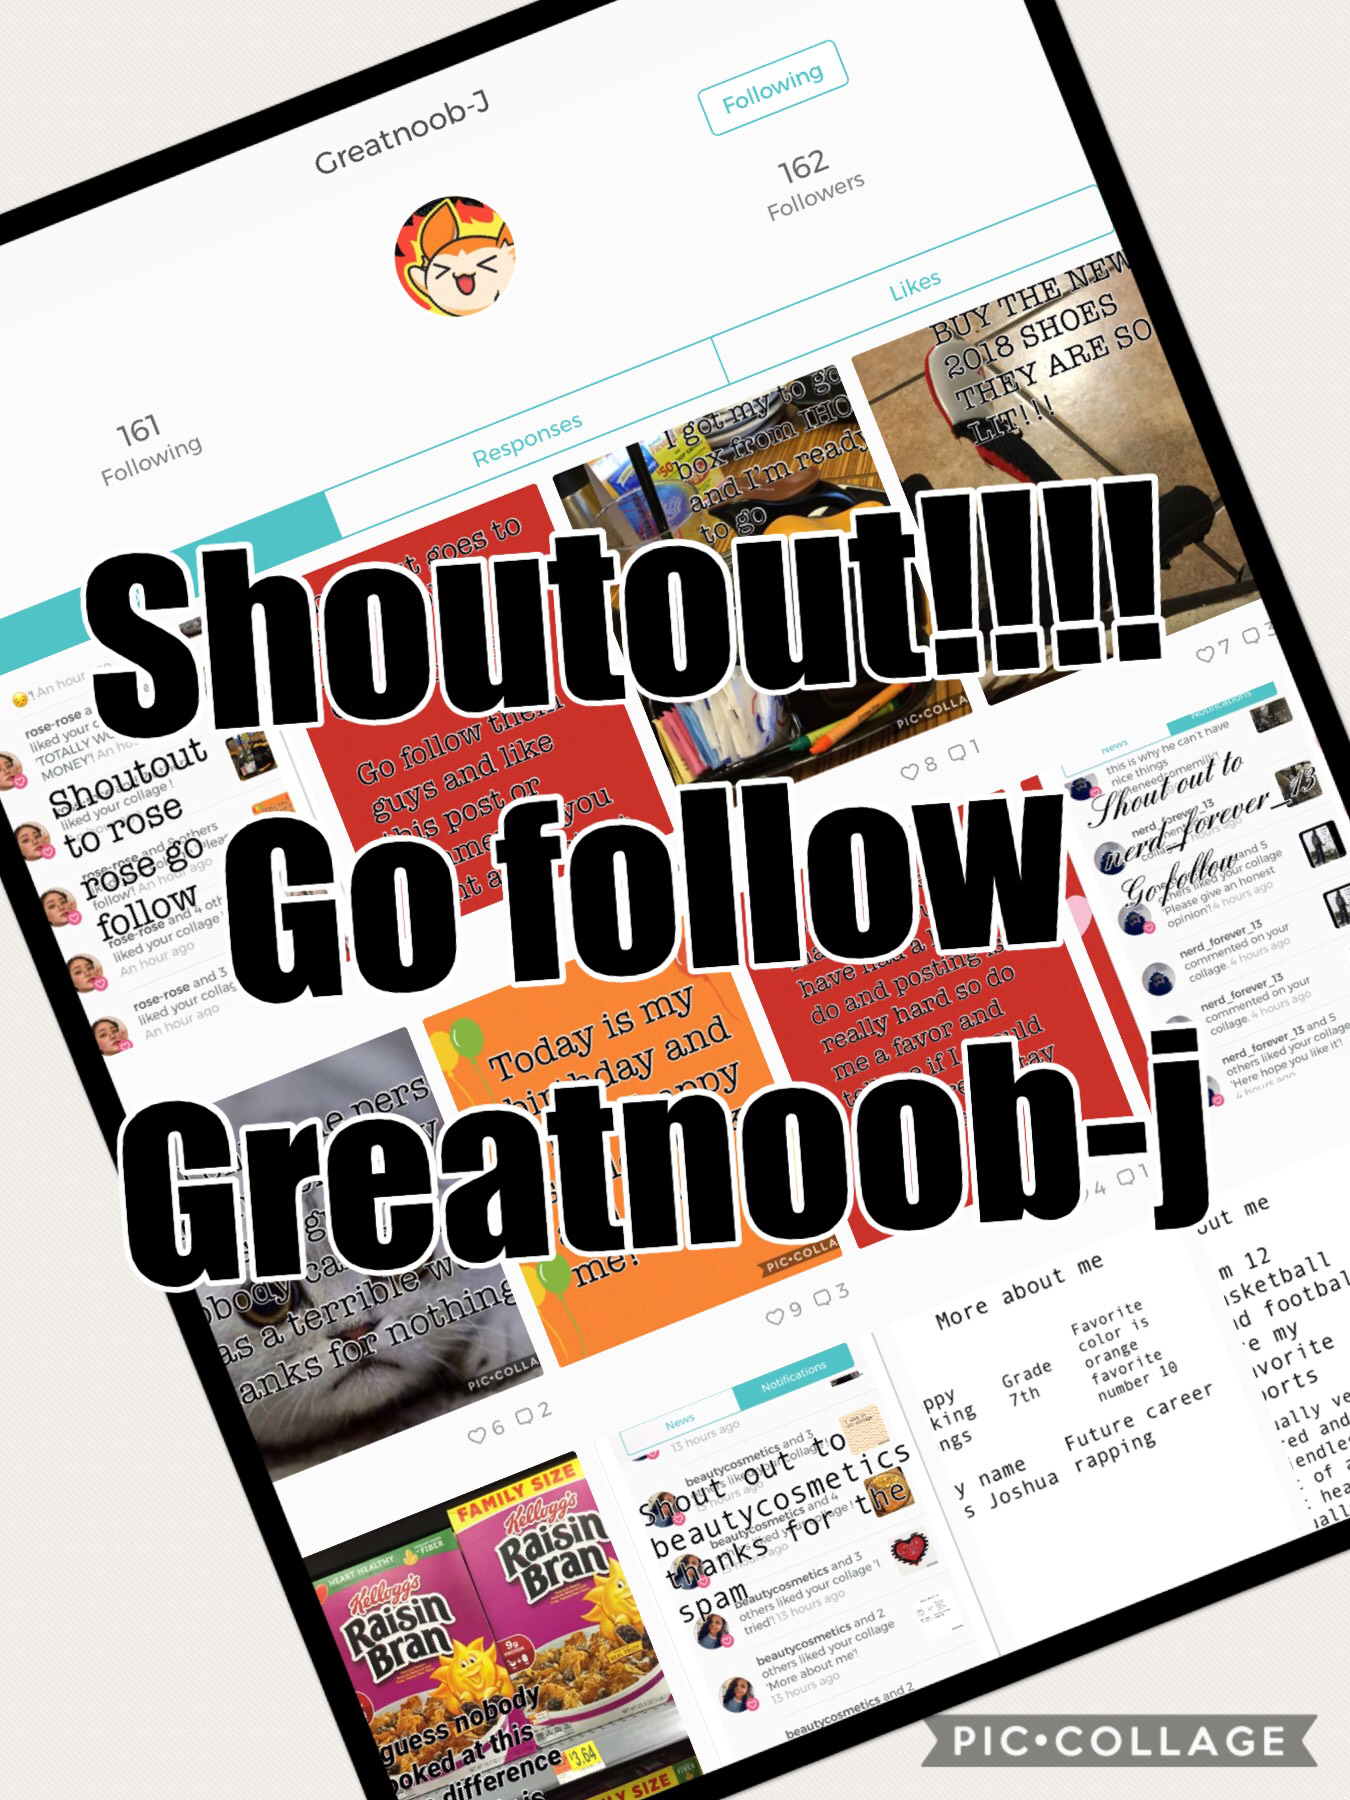 Shoutout!! Just ask in the comments and I will literally give a shoutout to anyone LOL